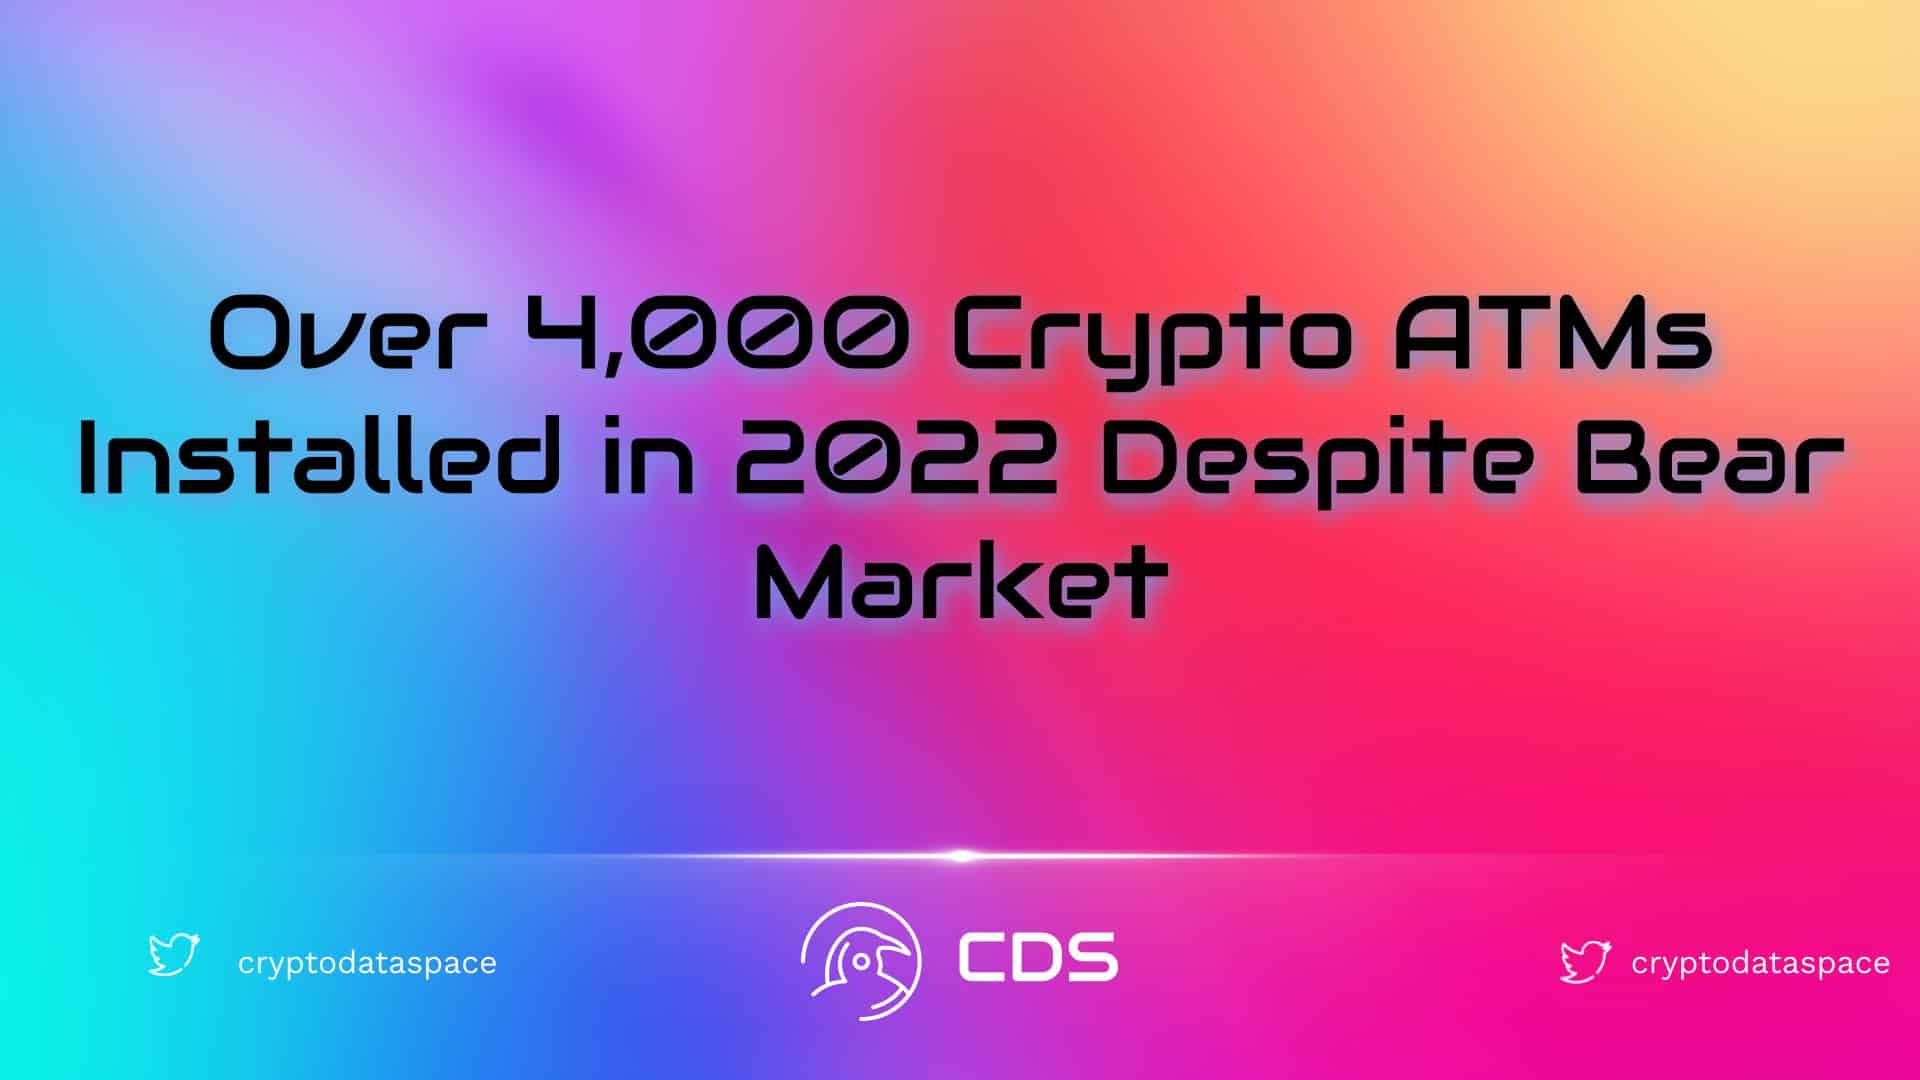 Over 4,000 Crypto ATMs Installed in 2022 Despite Bear Market